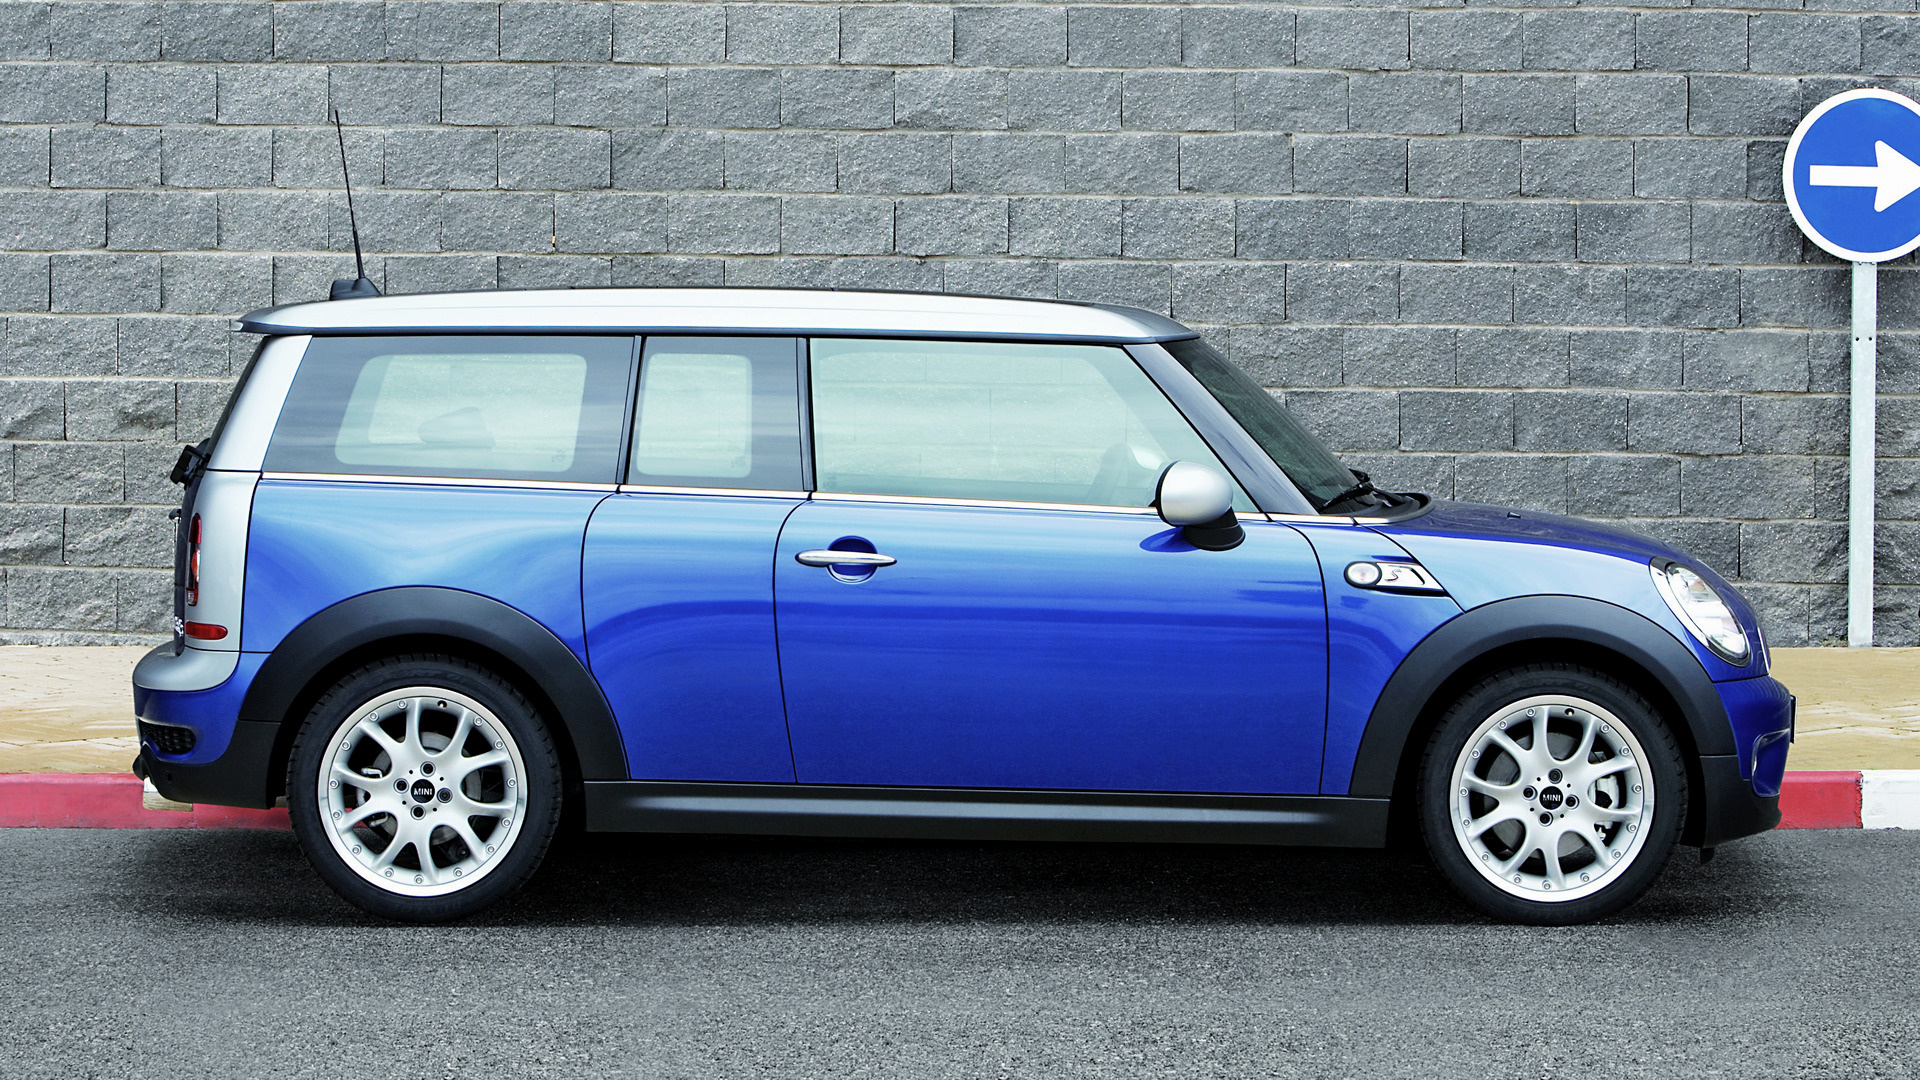 2007 Mini Cooper S Clubman - Wallpapers and HD Images | Car Pixel